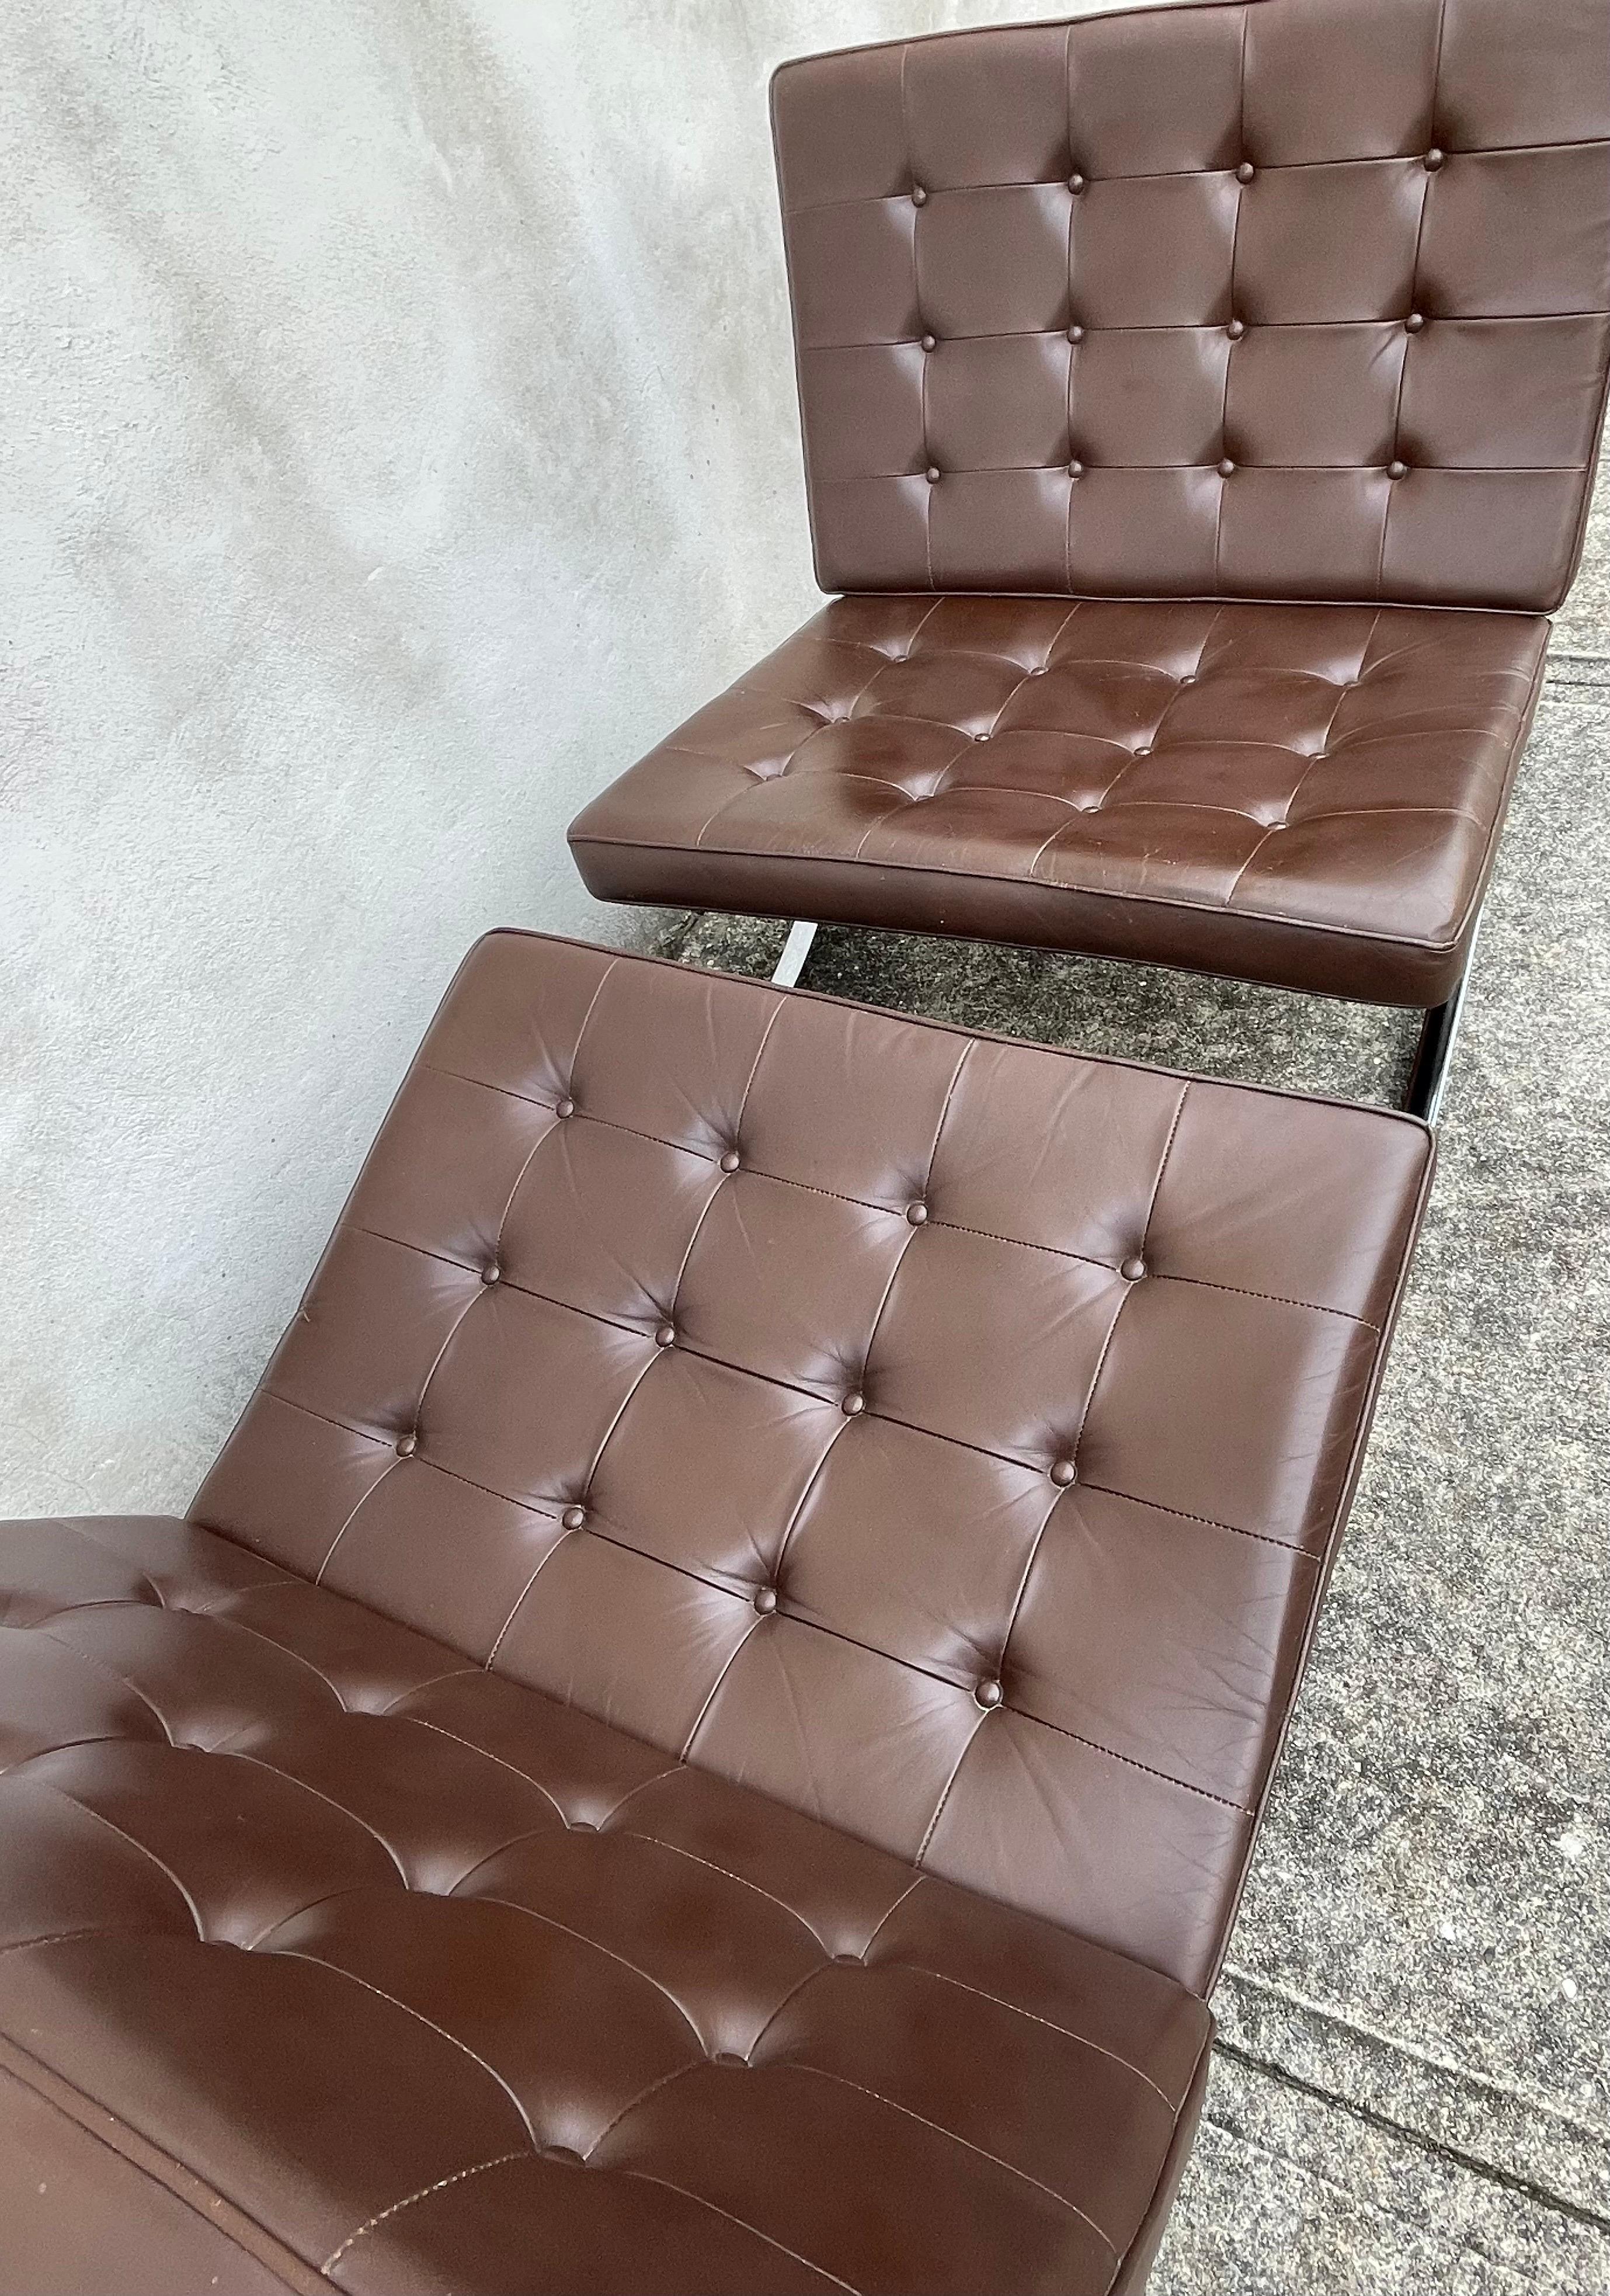 Steel Pair of Mid-Century Modern Barcelona Chairs in Brown Leather, 1970's Generation For Sale